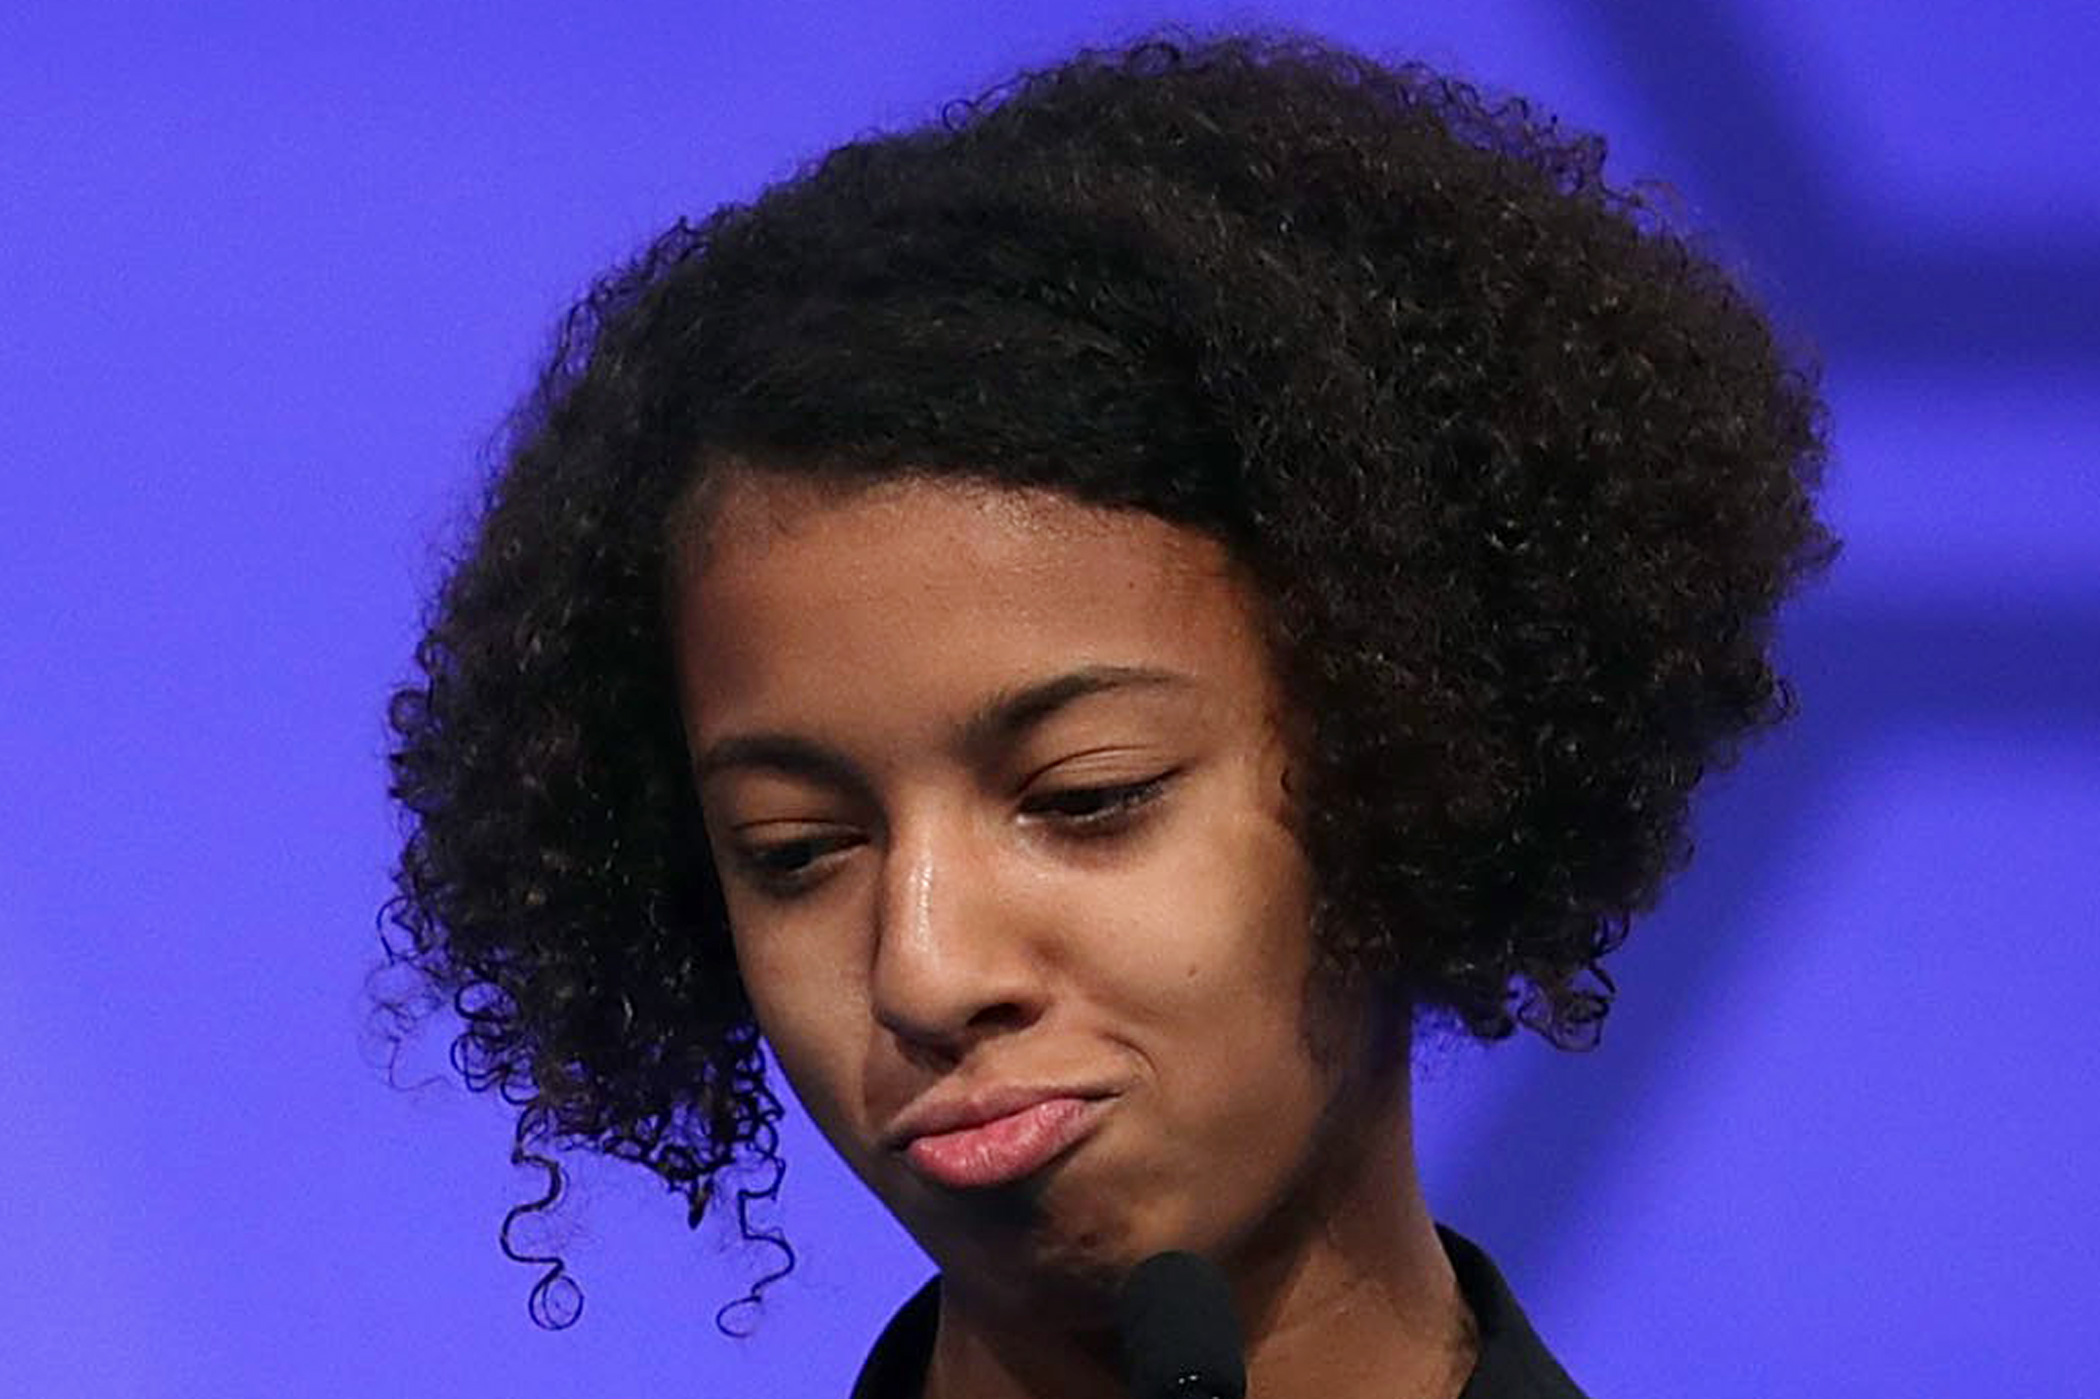 Ameera Waterford of Makawao, Hawaii, reacts after she misspelled her word in the finals of the 2016 Scripps National Spelling Bee on May 26, 2016 in National Harbor, Md.